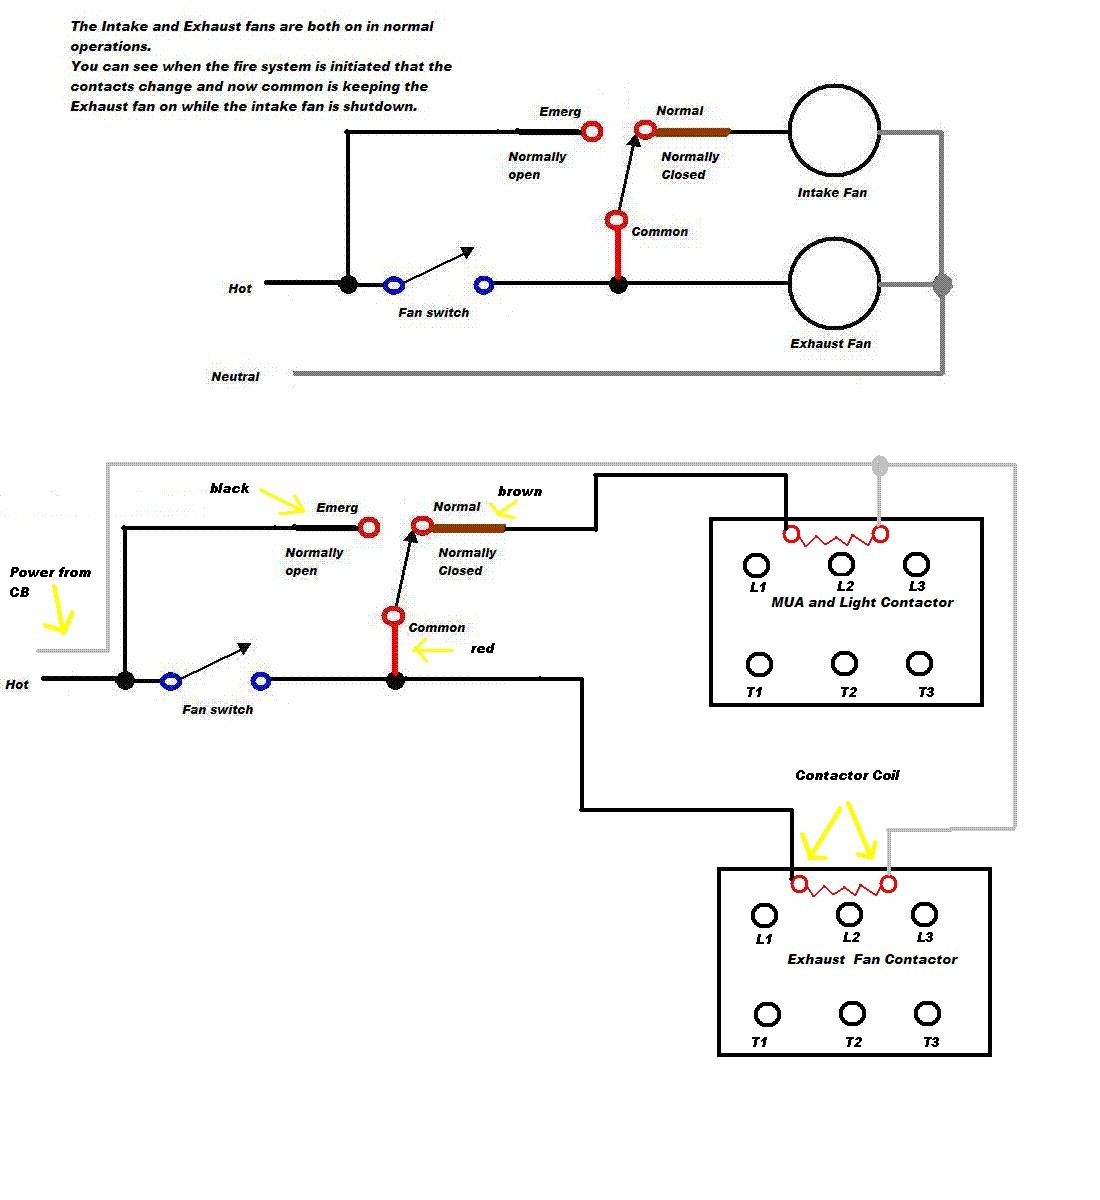 Ansul Fire Suppression System Wiring Diagram New Saleexpert Me